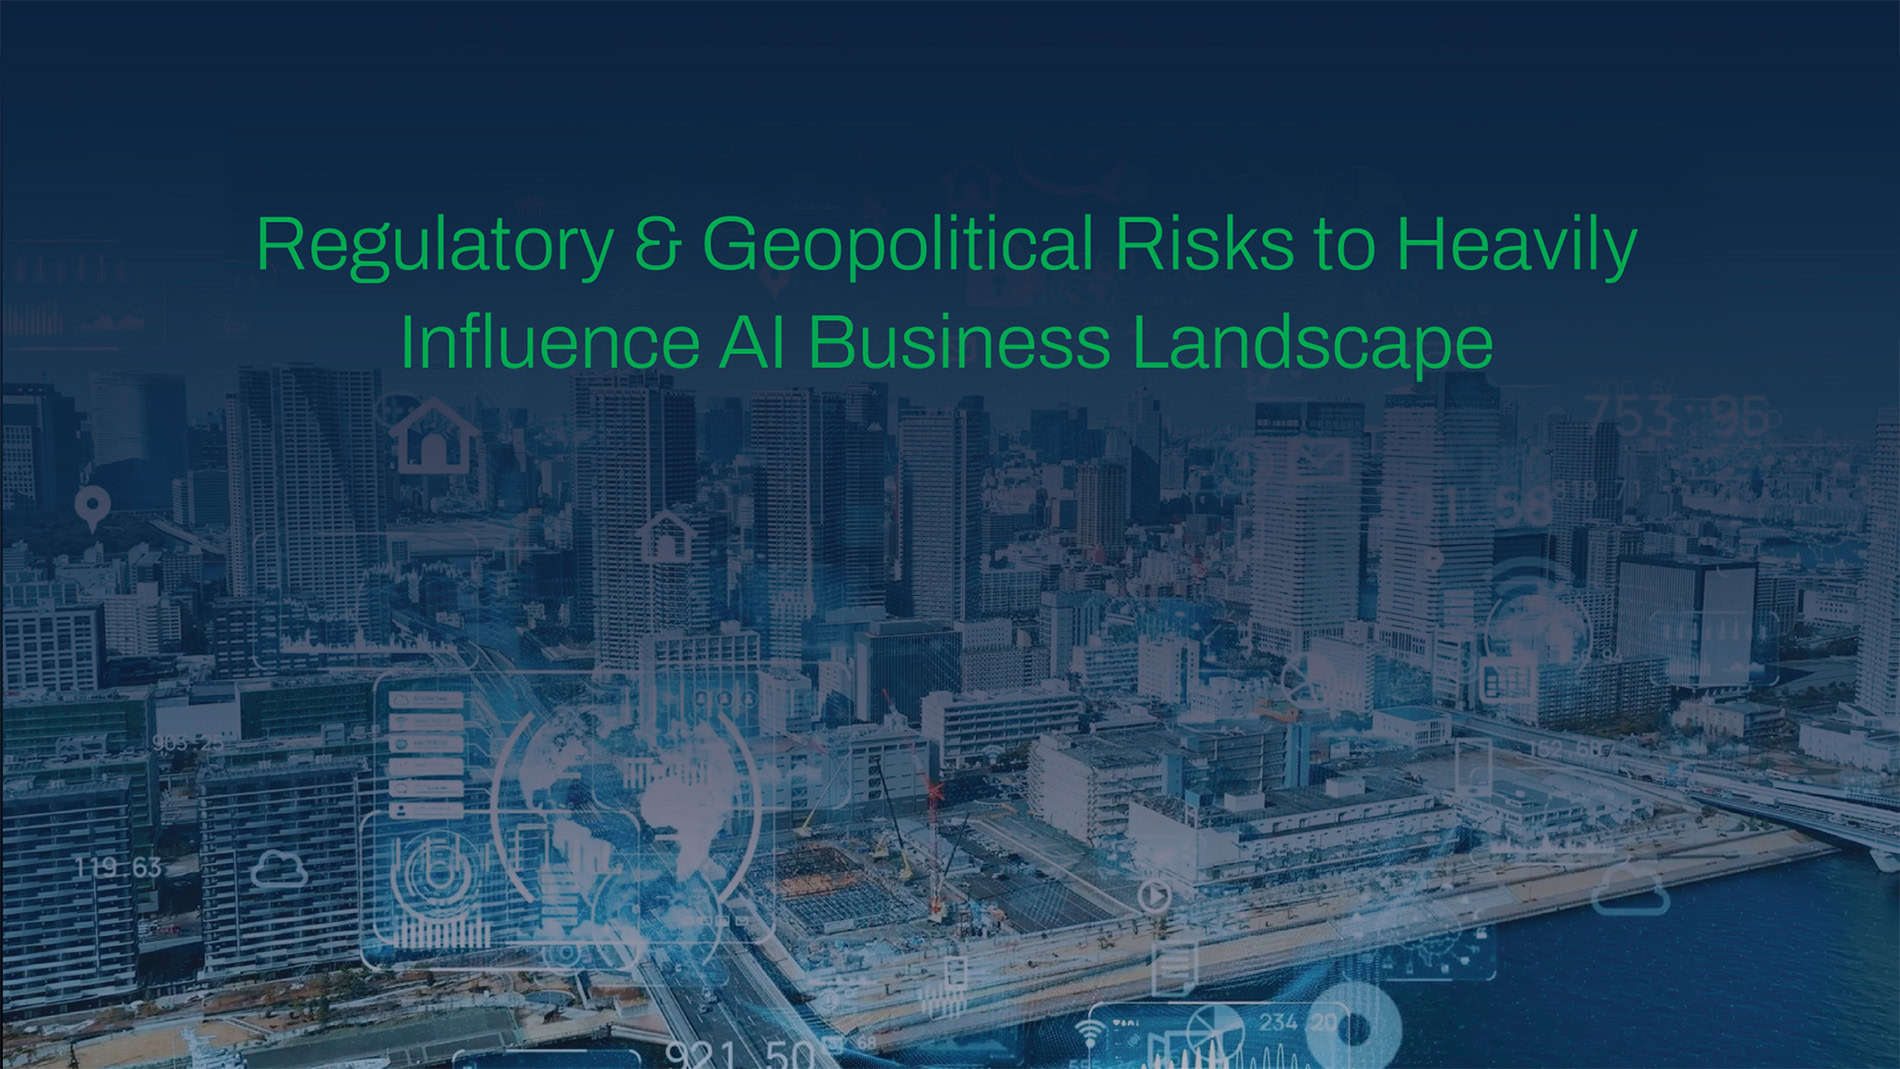 Seerist Big Picture Series: Regulatory & Geopolitical Risks to Heavily Influence AI Business Landscape